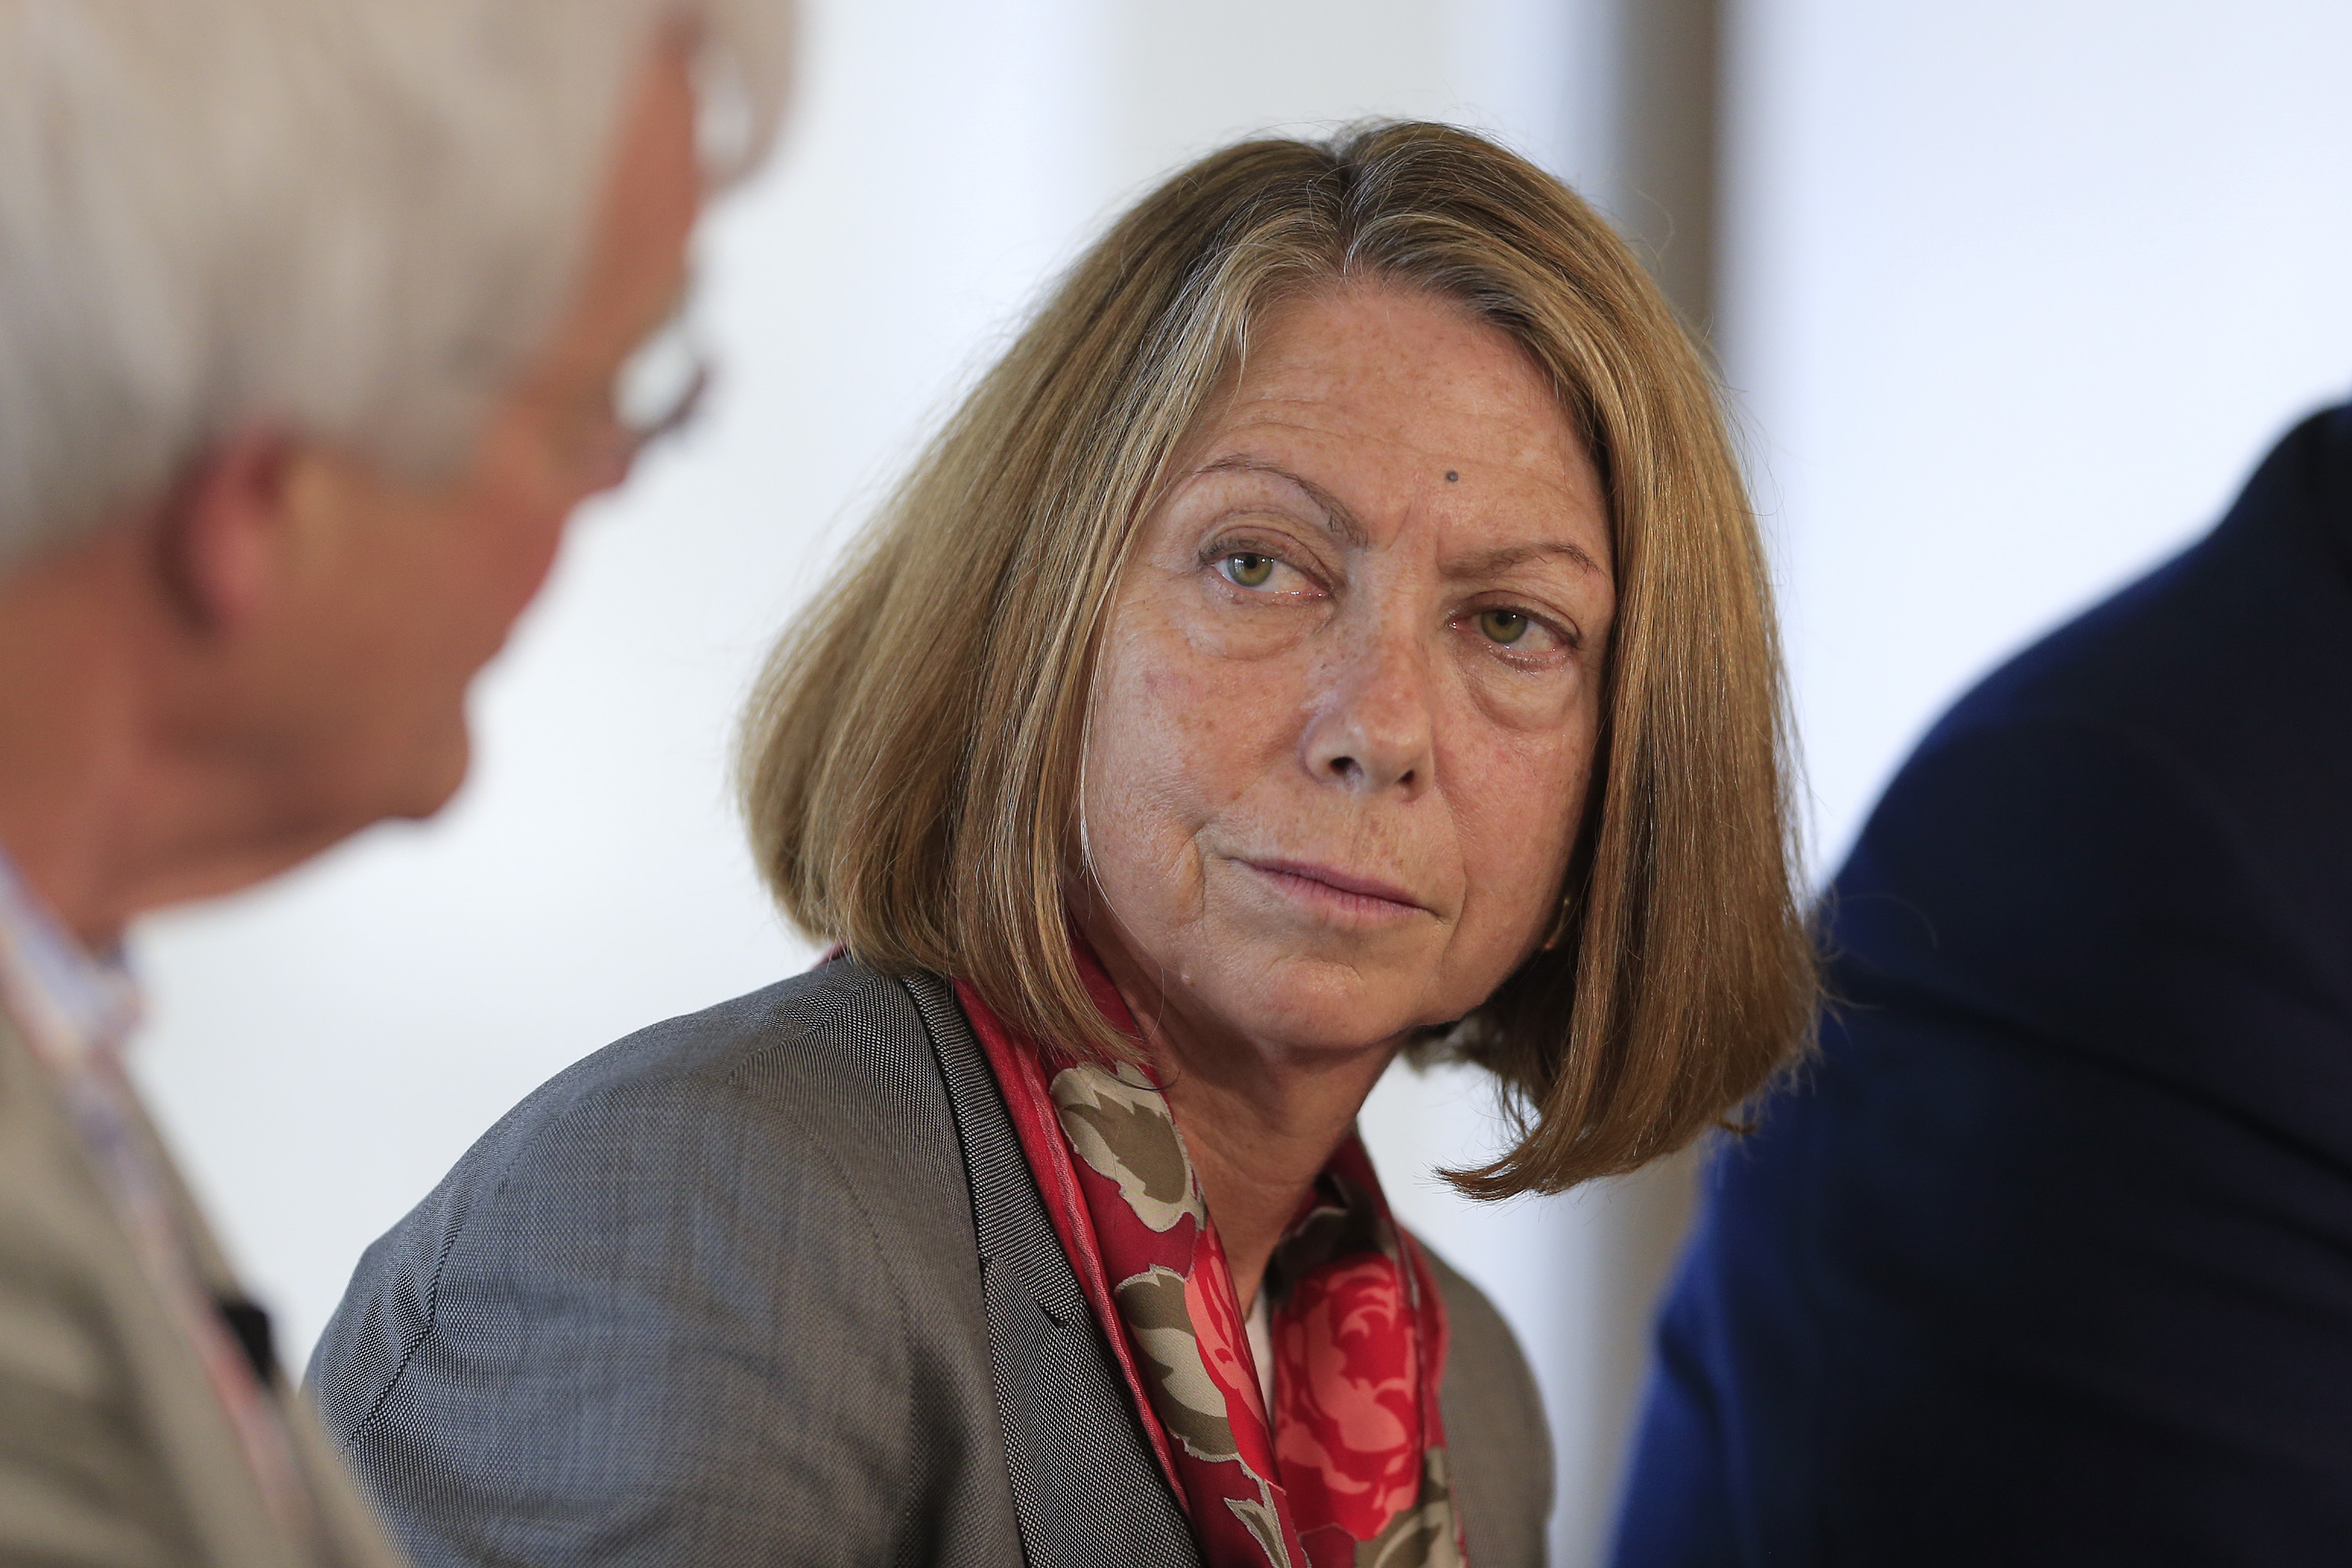 Jill Abramson, executive editor of The New York Times, listens during a panel discussion on the sidelines of the Republican National Convention (RNC) in Tampa on Aug. 26, 2012. (Andrew Harrer—Bloomberg/Getty Images)